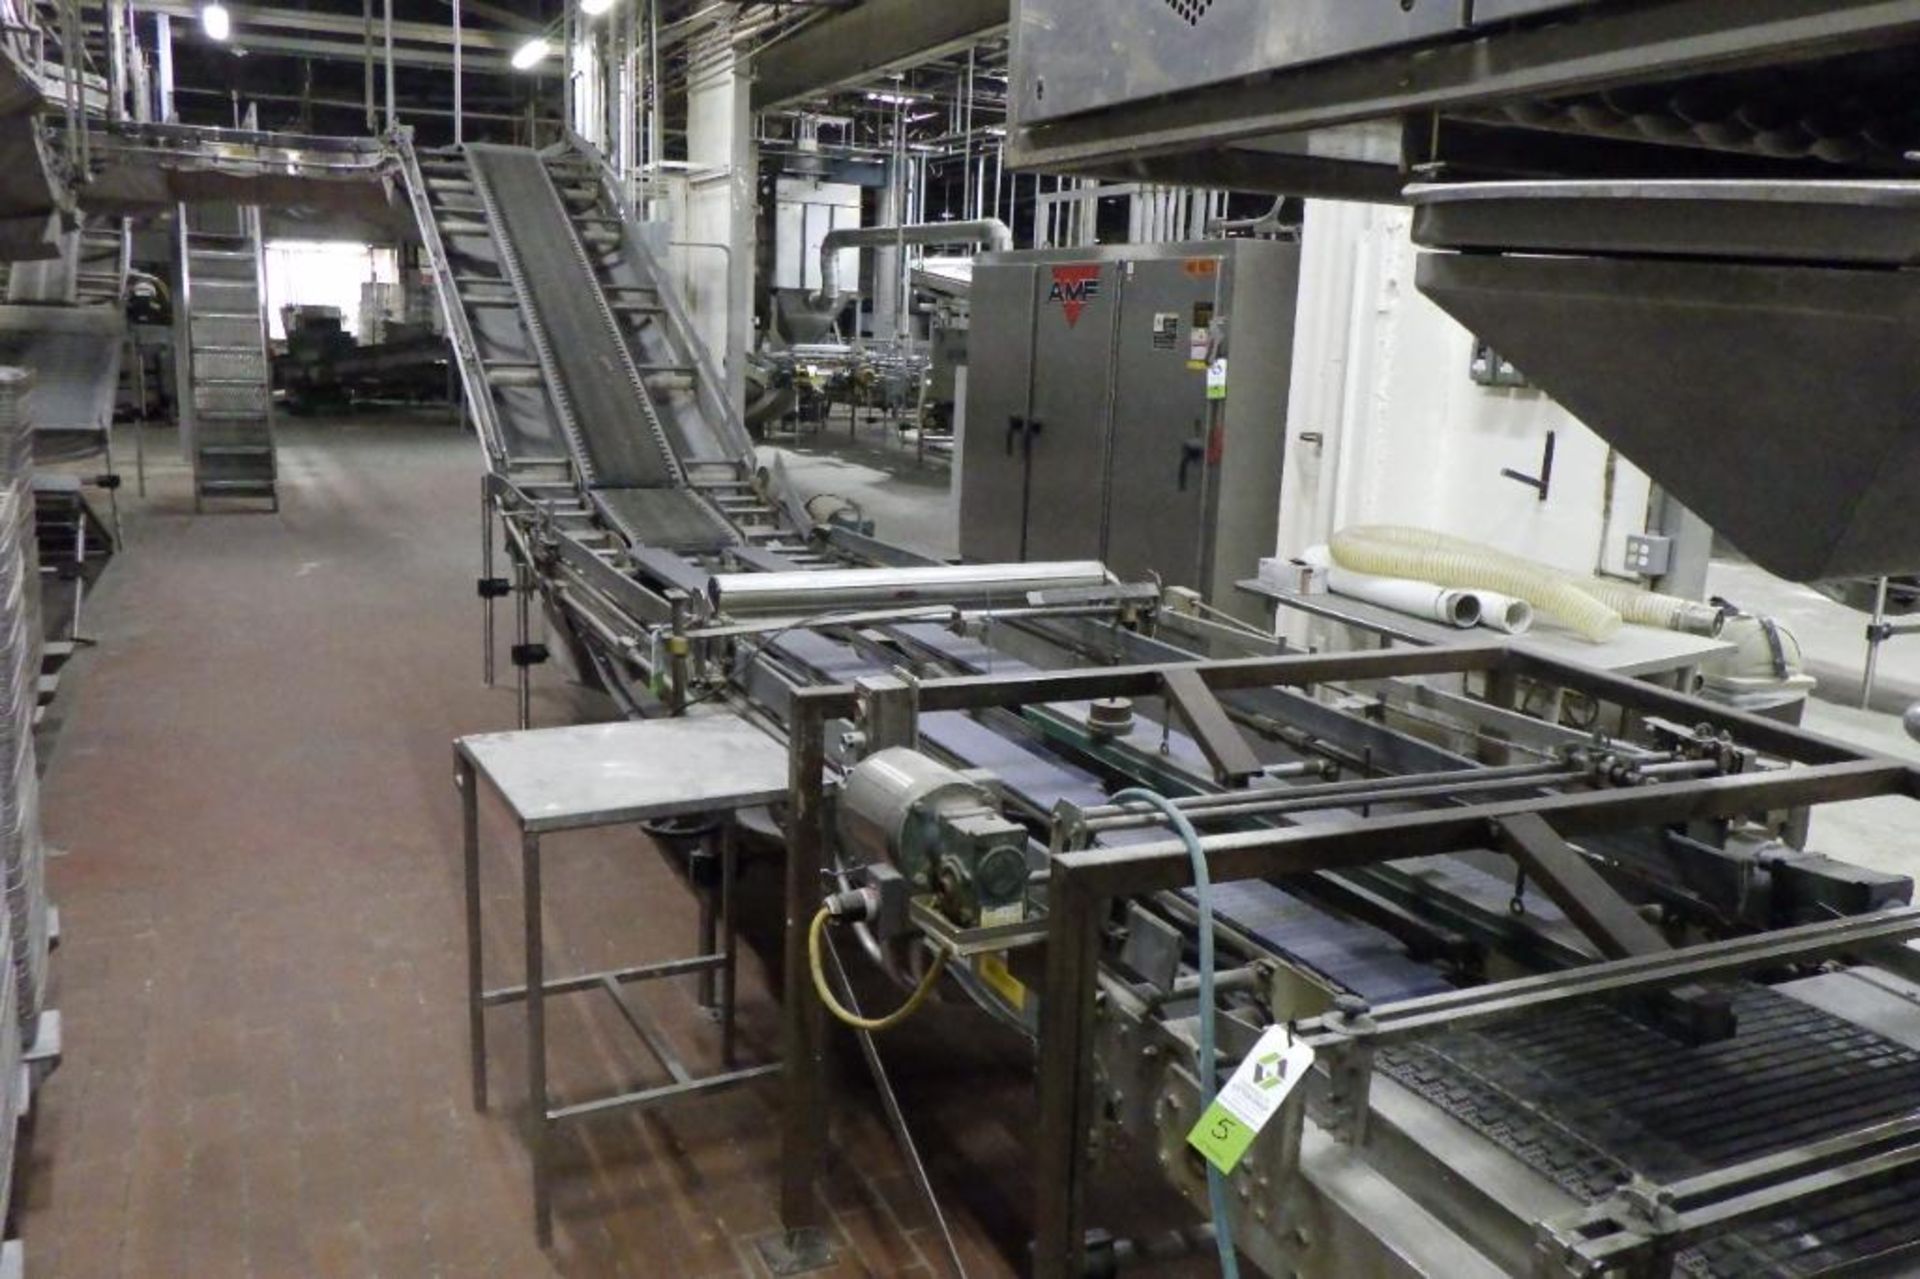 Stewart systems empty pan conveyor - Image 17 of 27